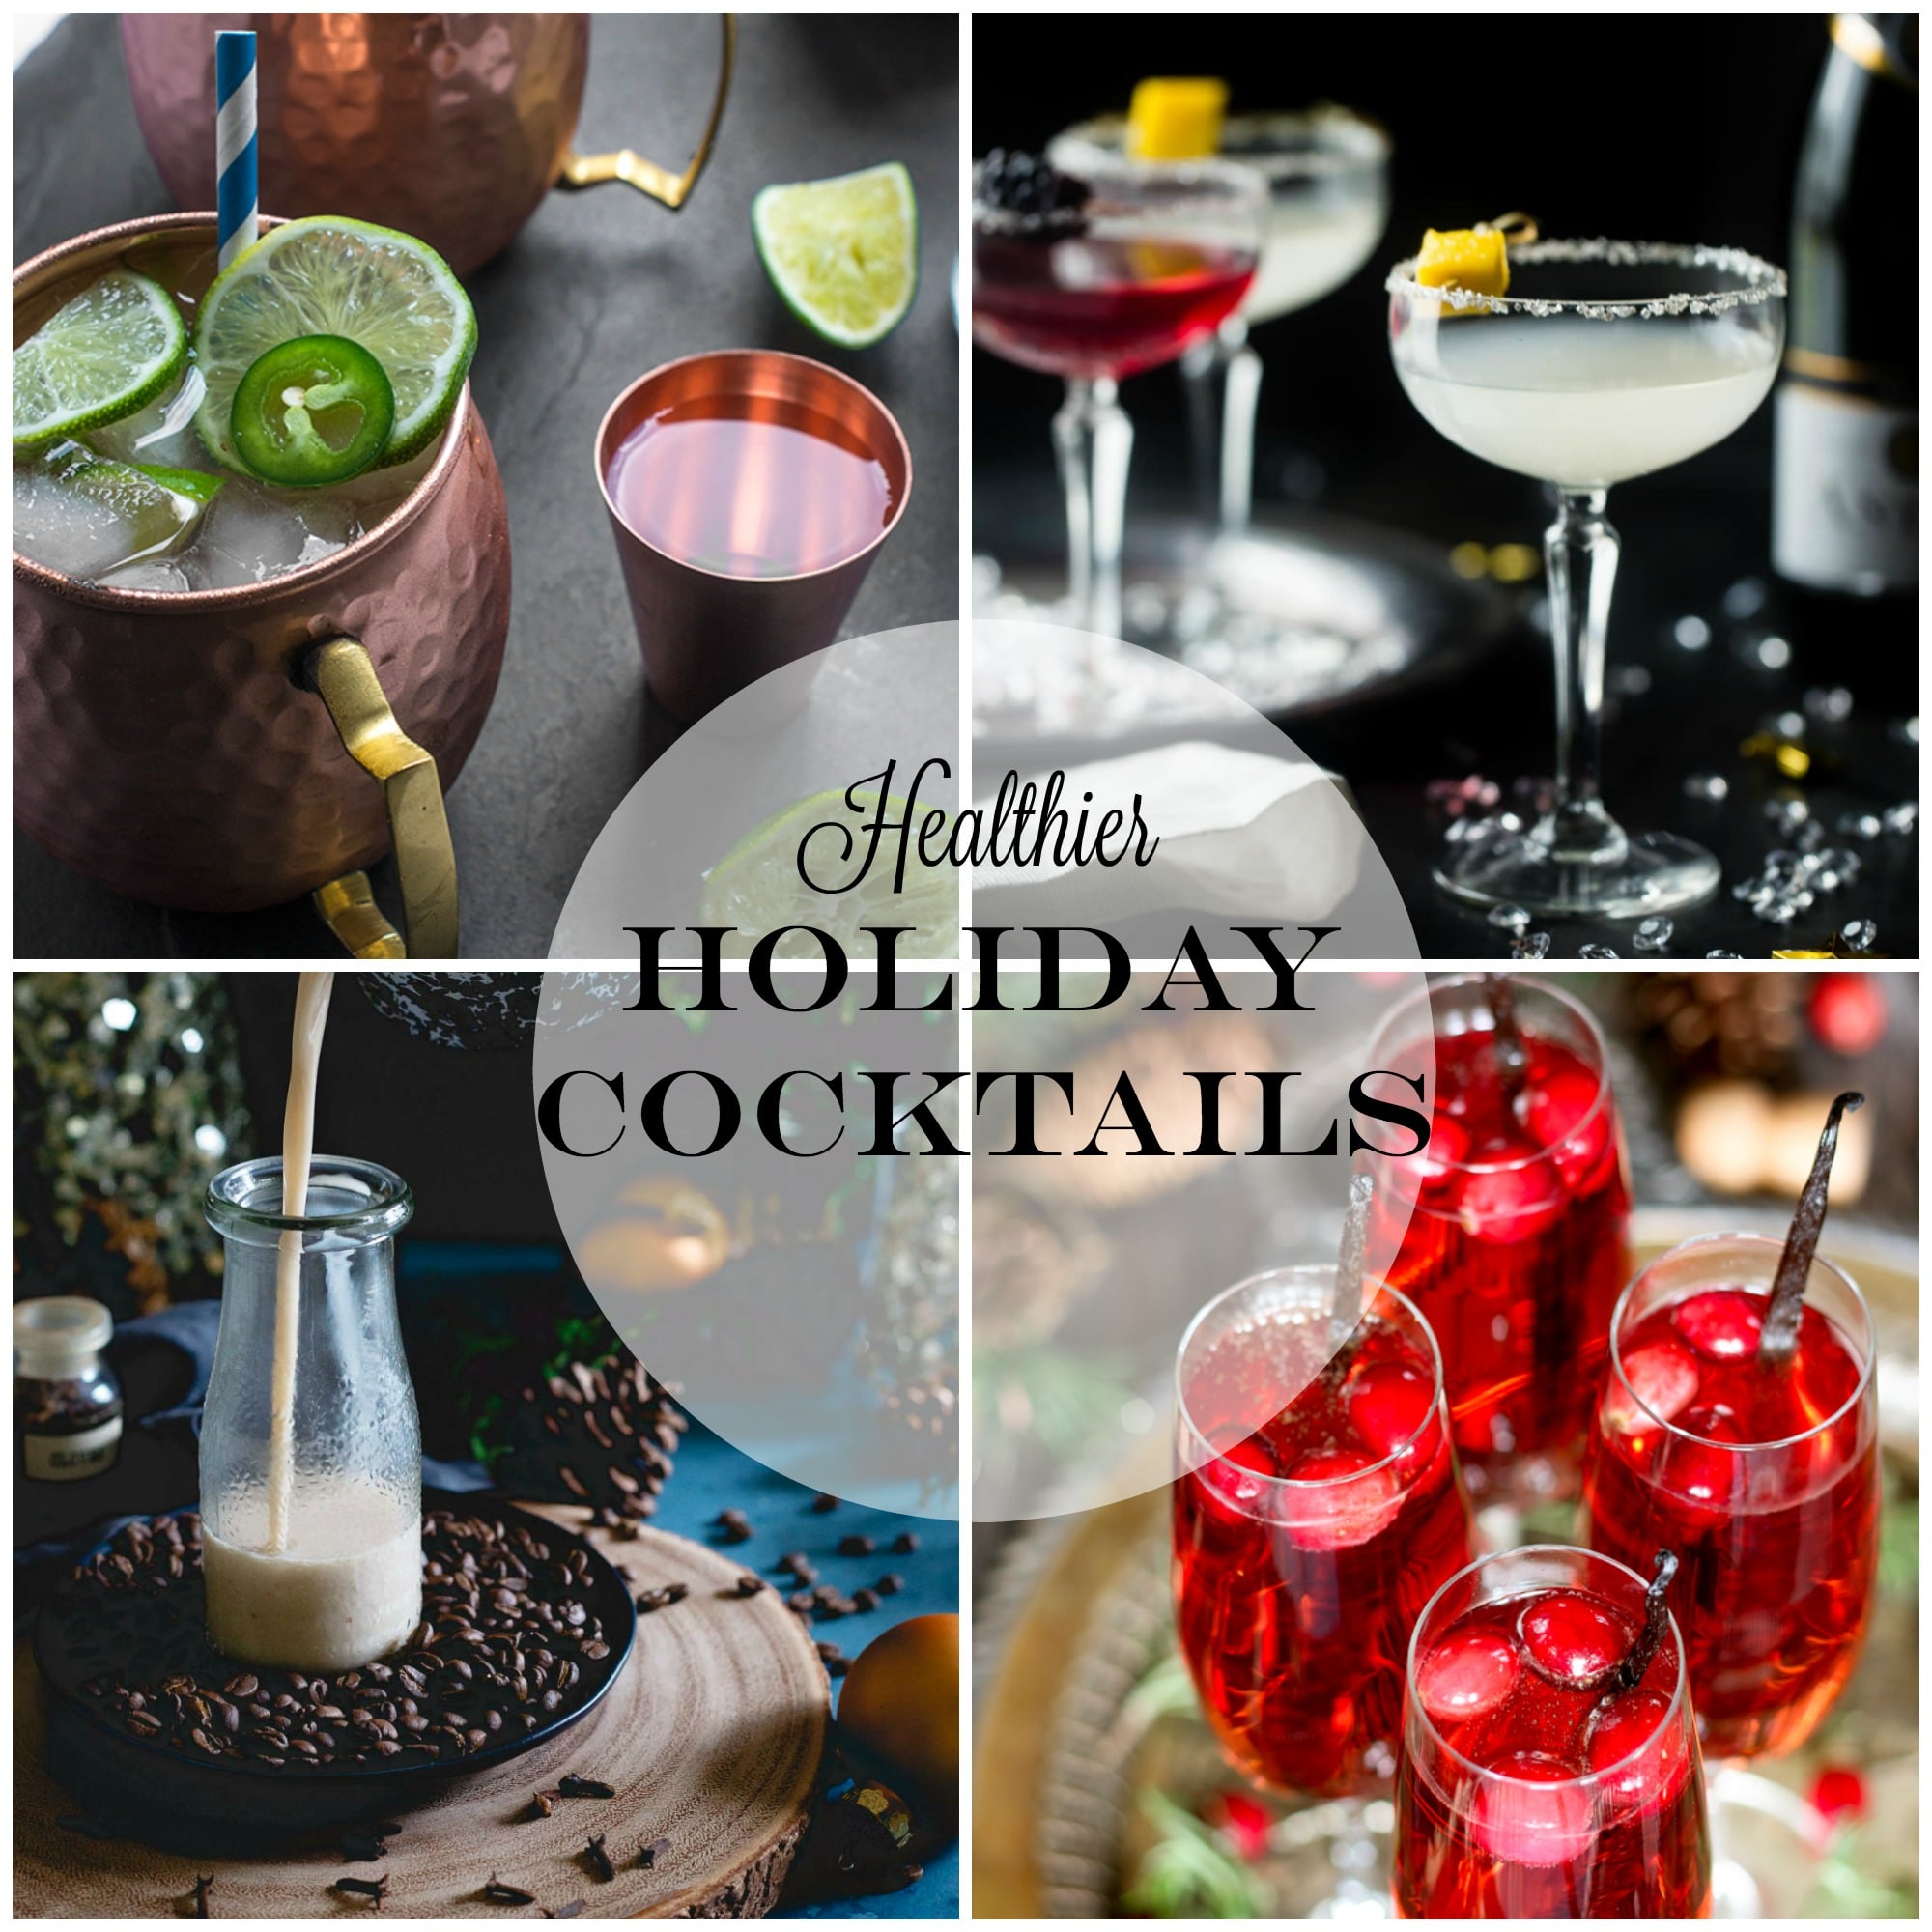 Healthier Holiday Cocktails from Lauren Kelly Nutrition